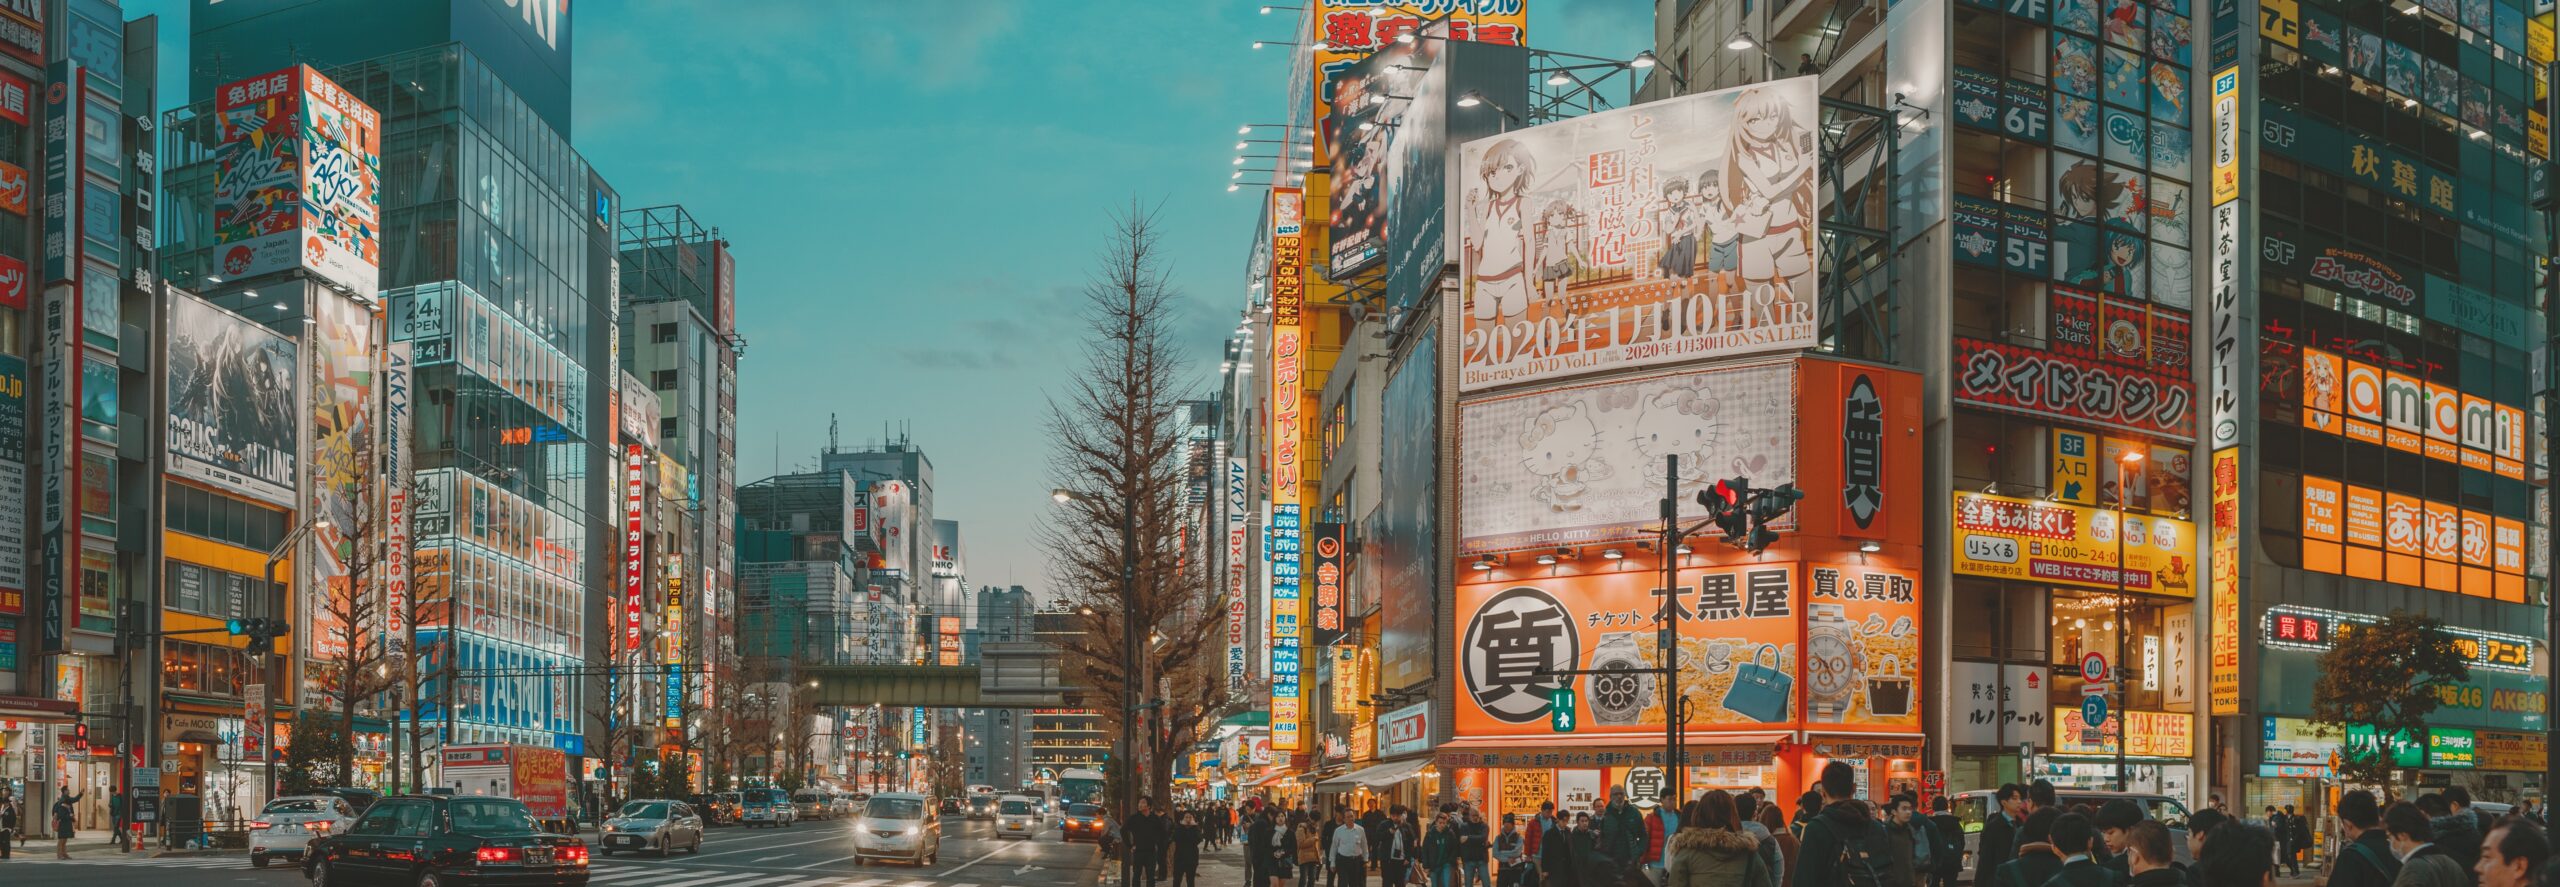 Akihabara is a stunning area that can be visited thoughout the year comfortably. 
pictured: Akihabara's Chuo Dori street during winter with bright shining lights illuminating the buildings and locals walking around